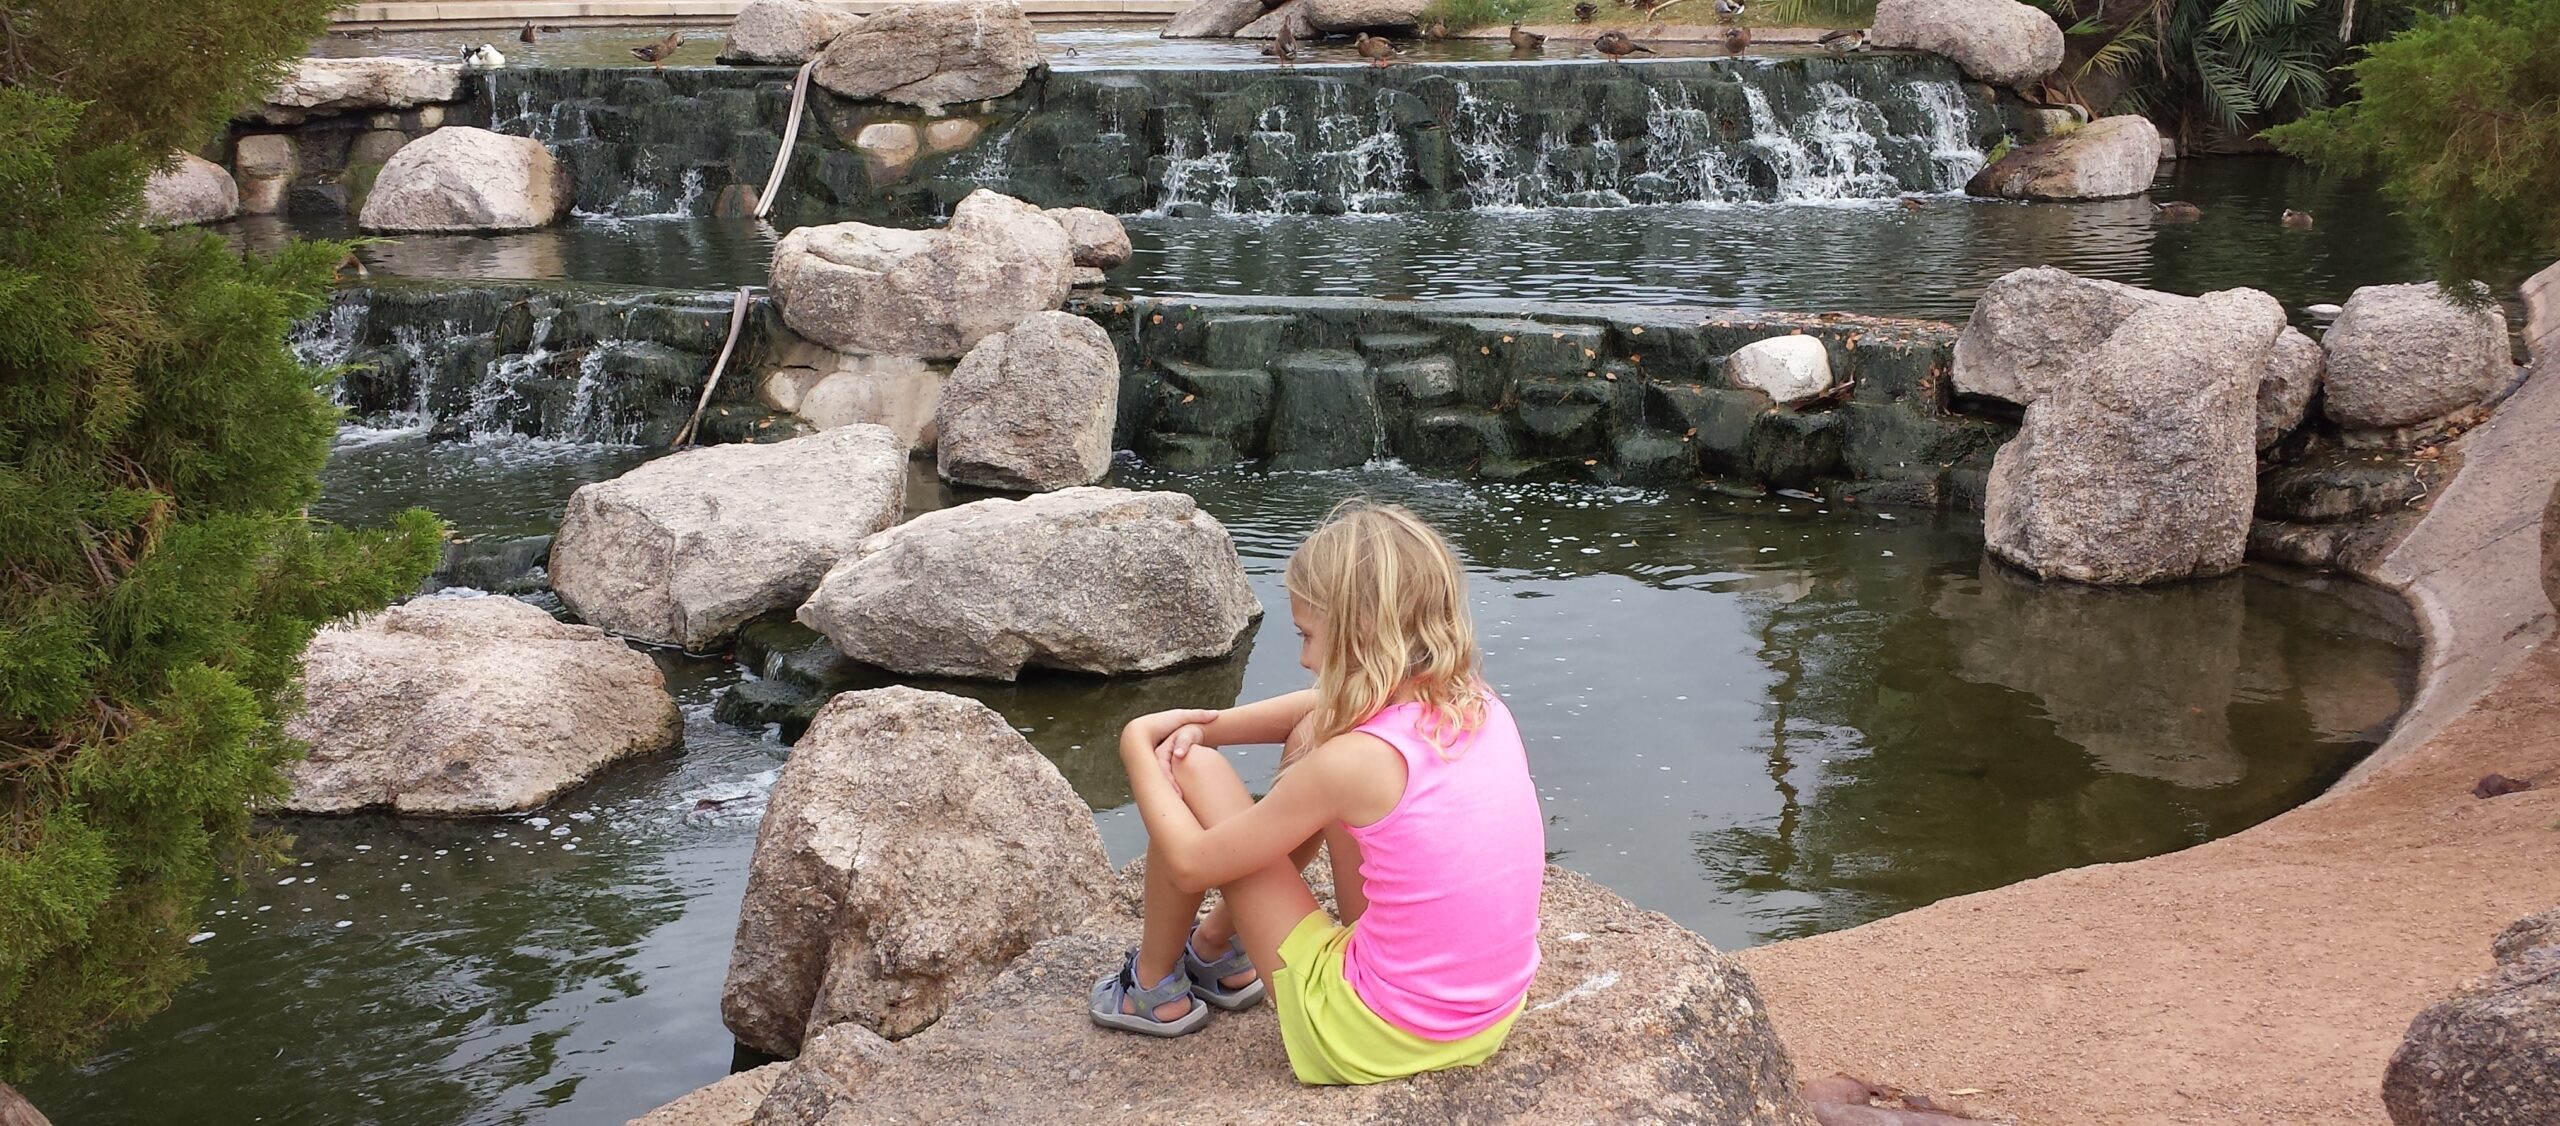 Girl sitting on rocks beside a waterfall - Freestone Park Gilbert AZ, Gilbert homes for sale, Best Places to Live - Bill Salvatore, Your Valley Property Team - Arizona Elite Properties 602-999-0952